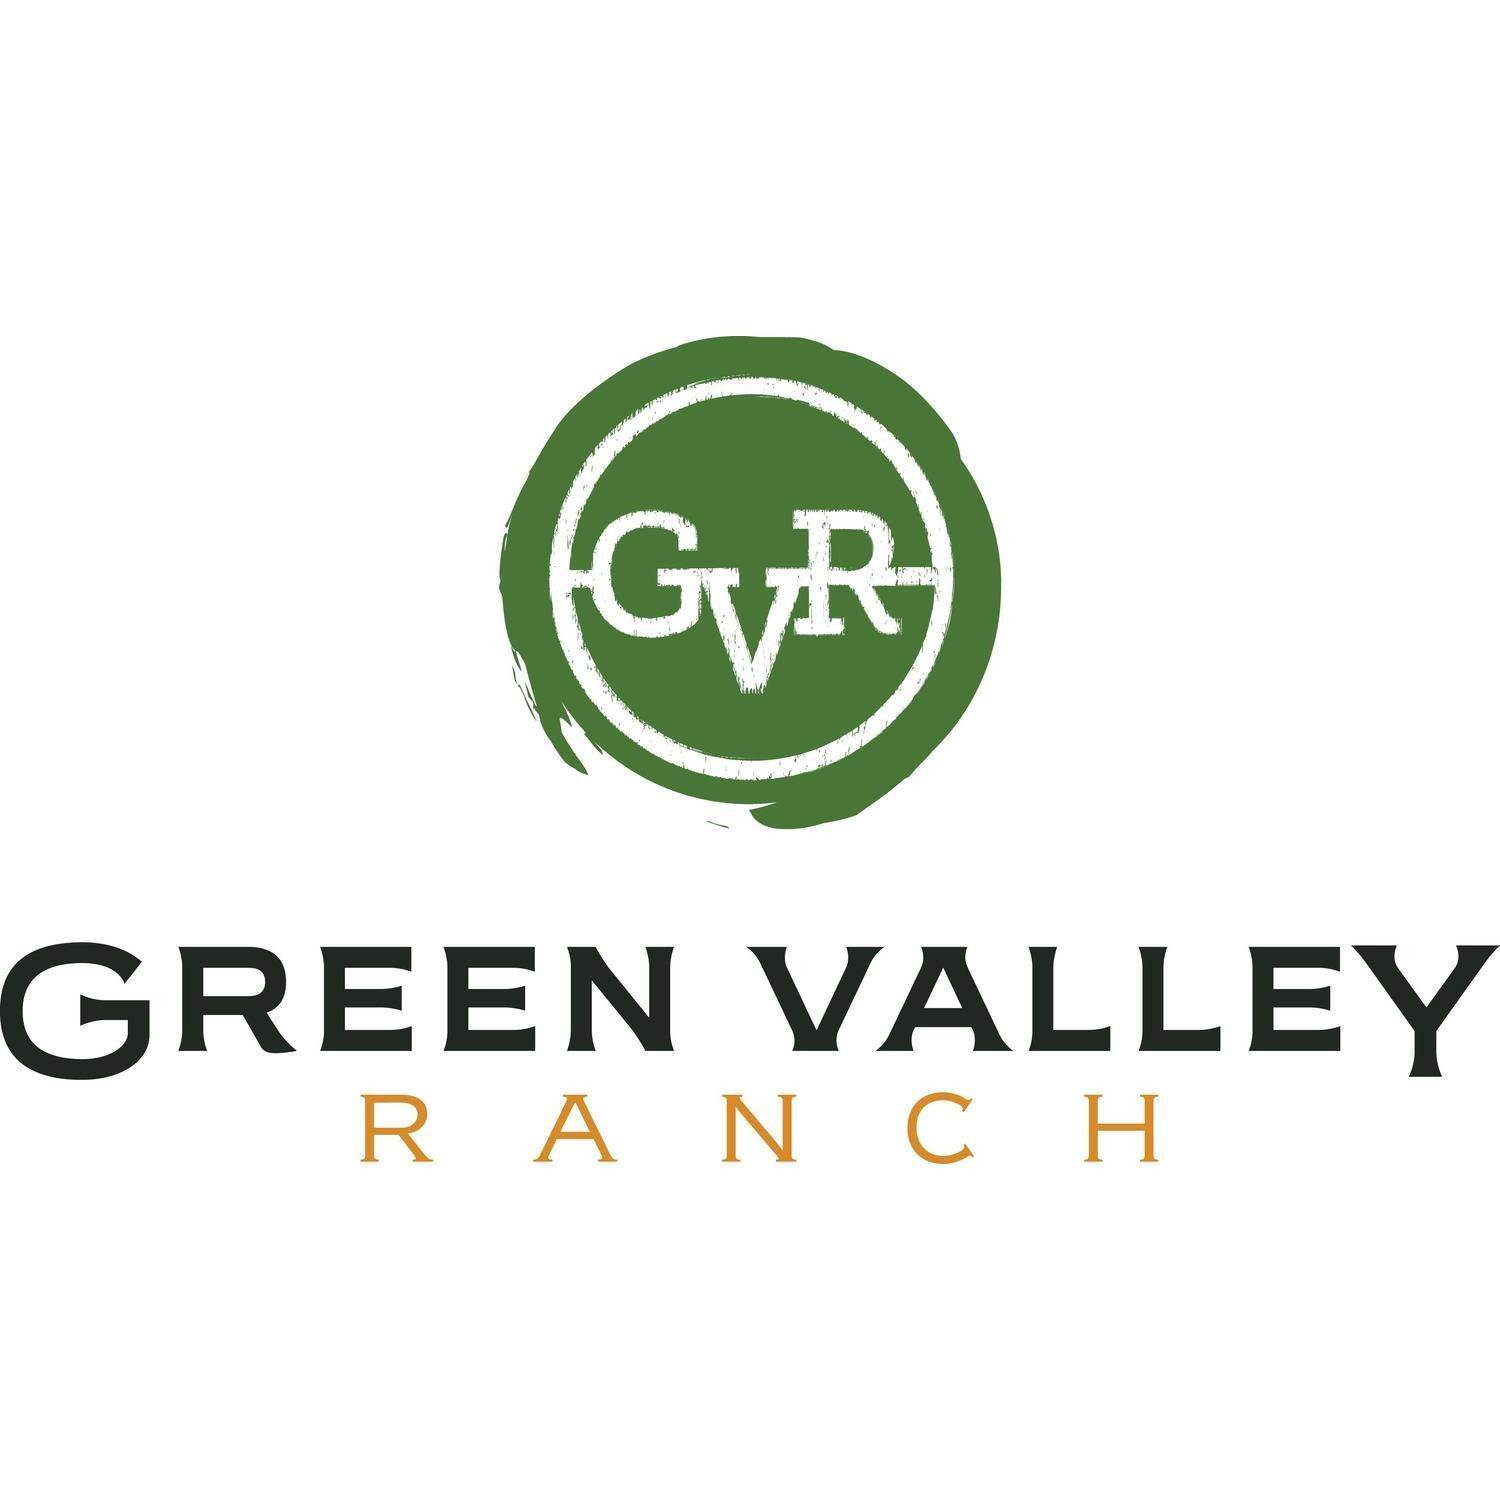 Green Valley Ranch建於 21880 E. 46th Place, Aurora, CO 80019